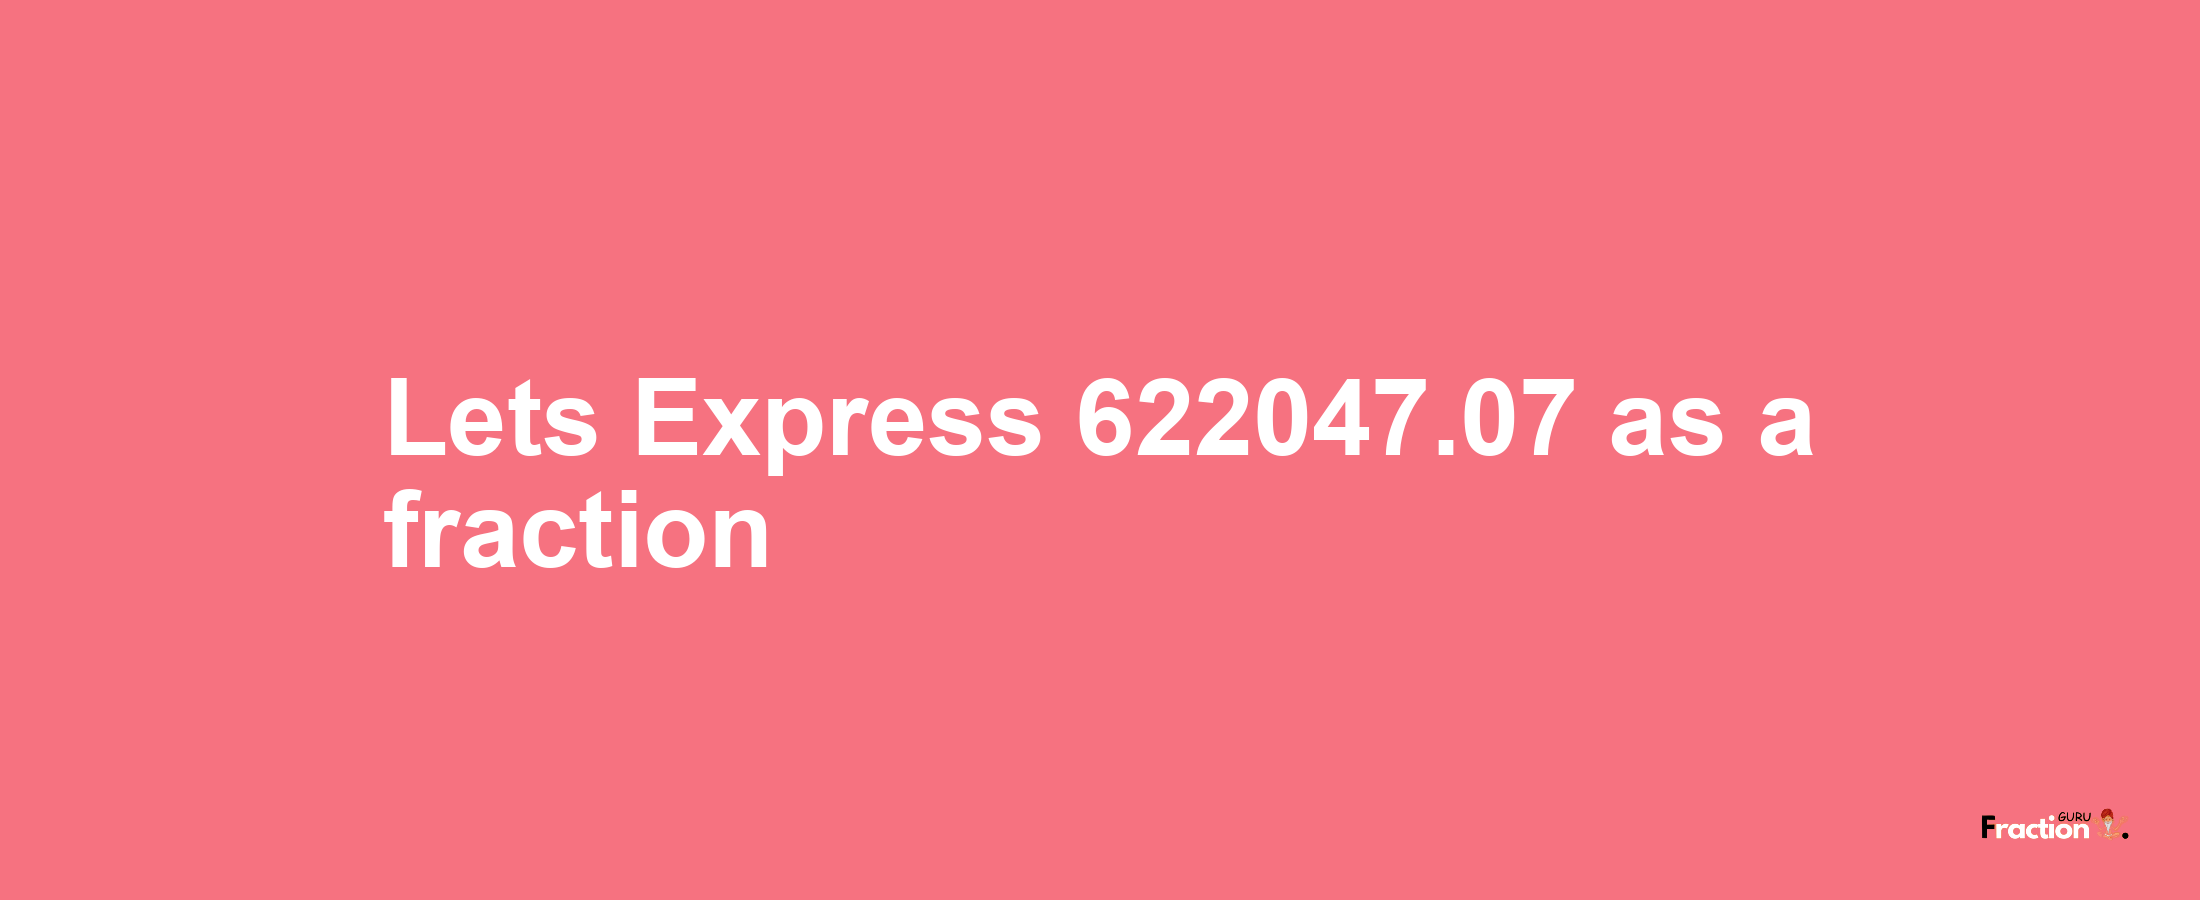 Lets Express 622047.07 as afraction